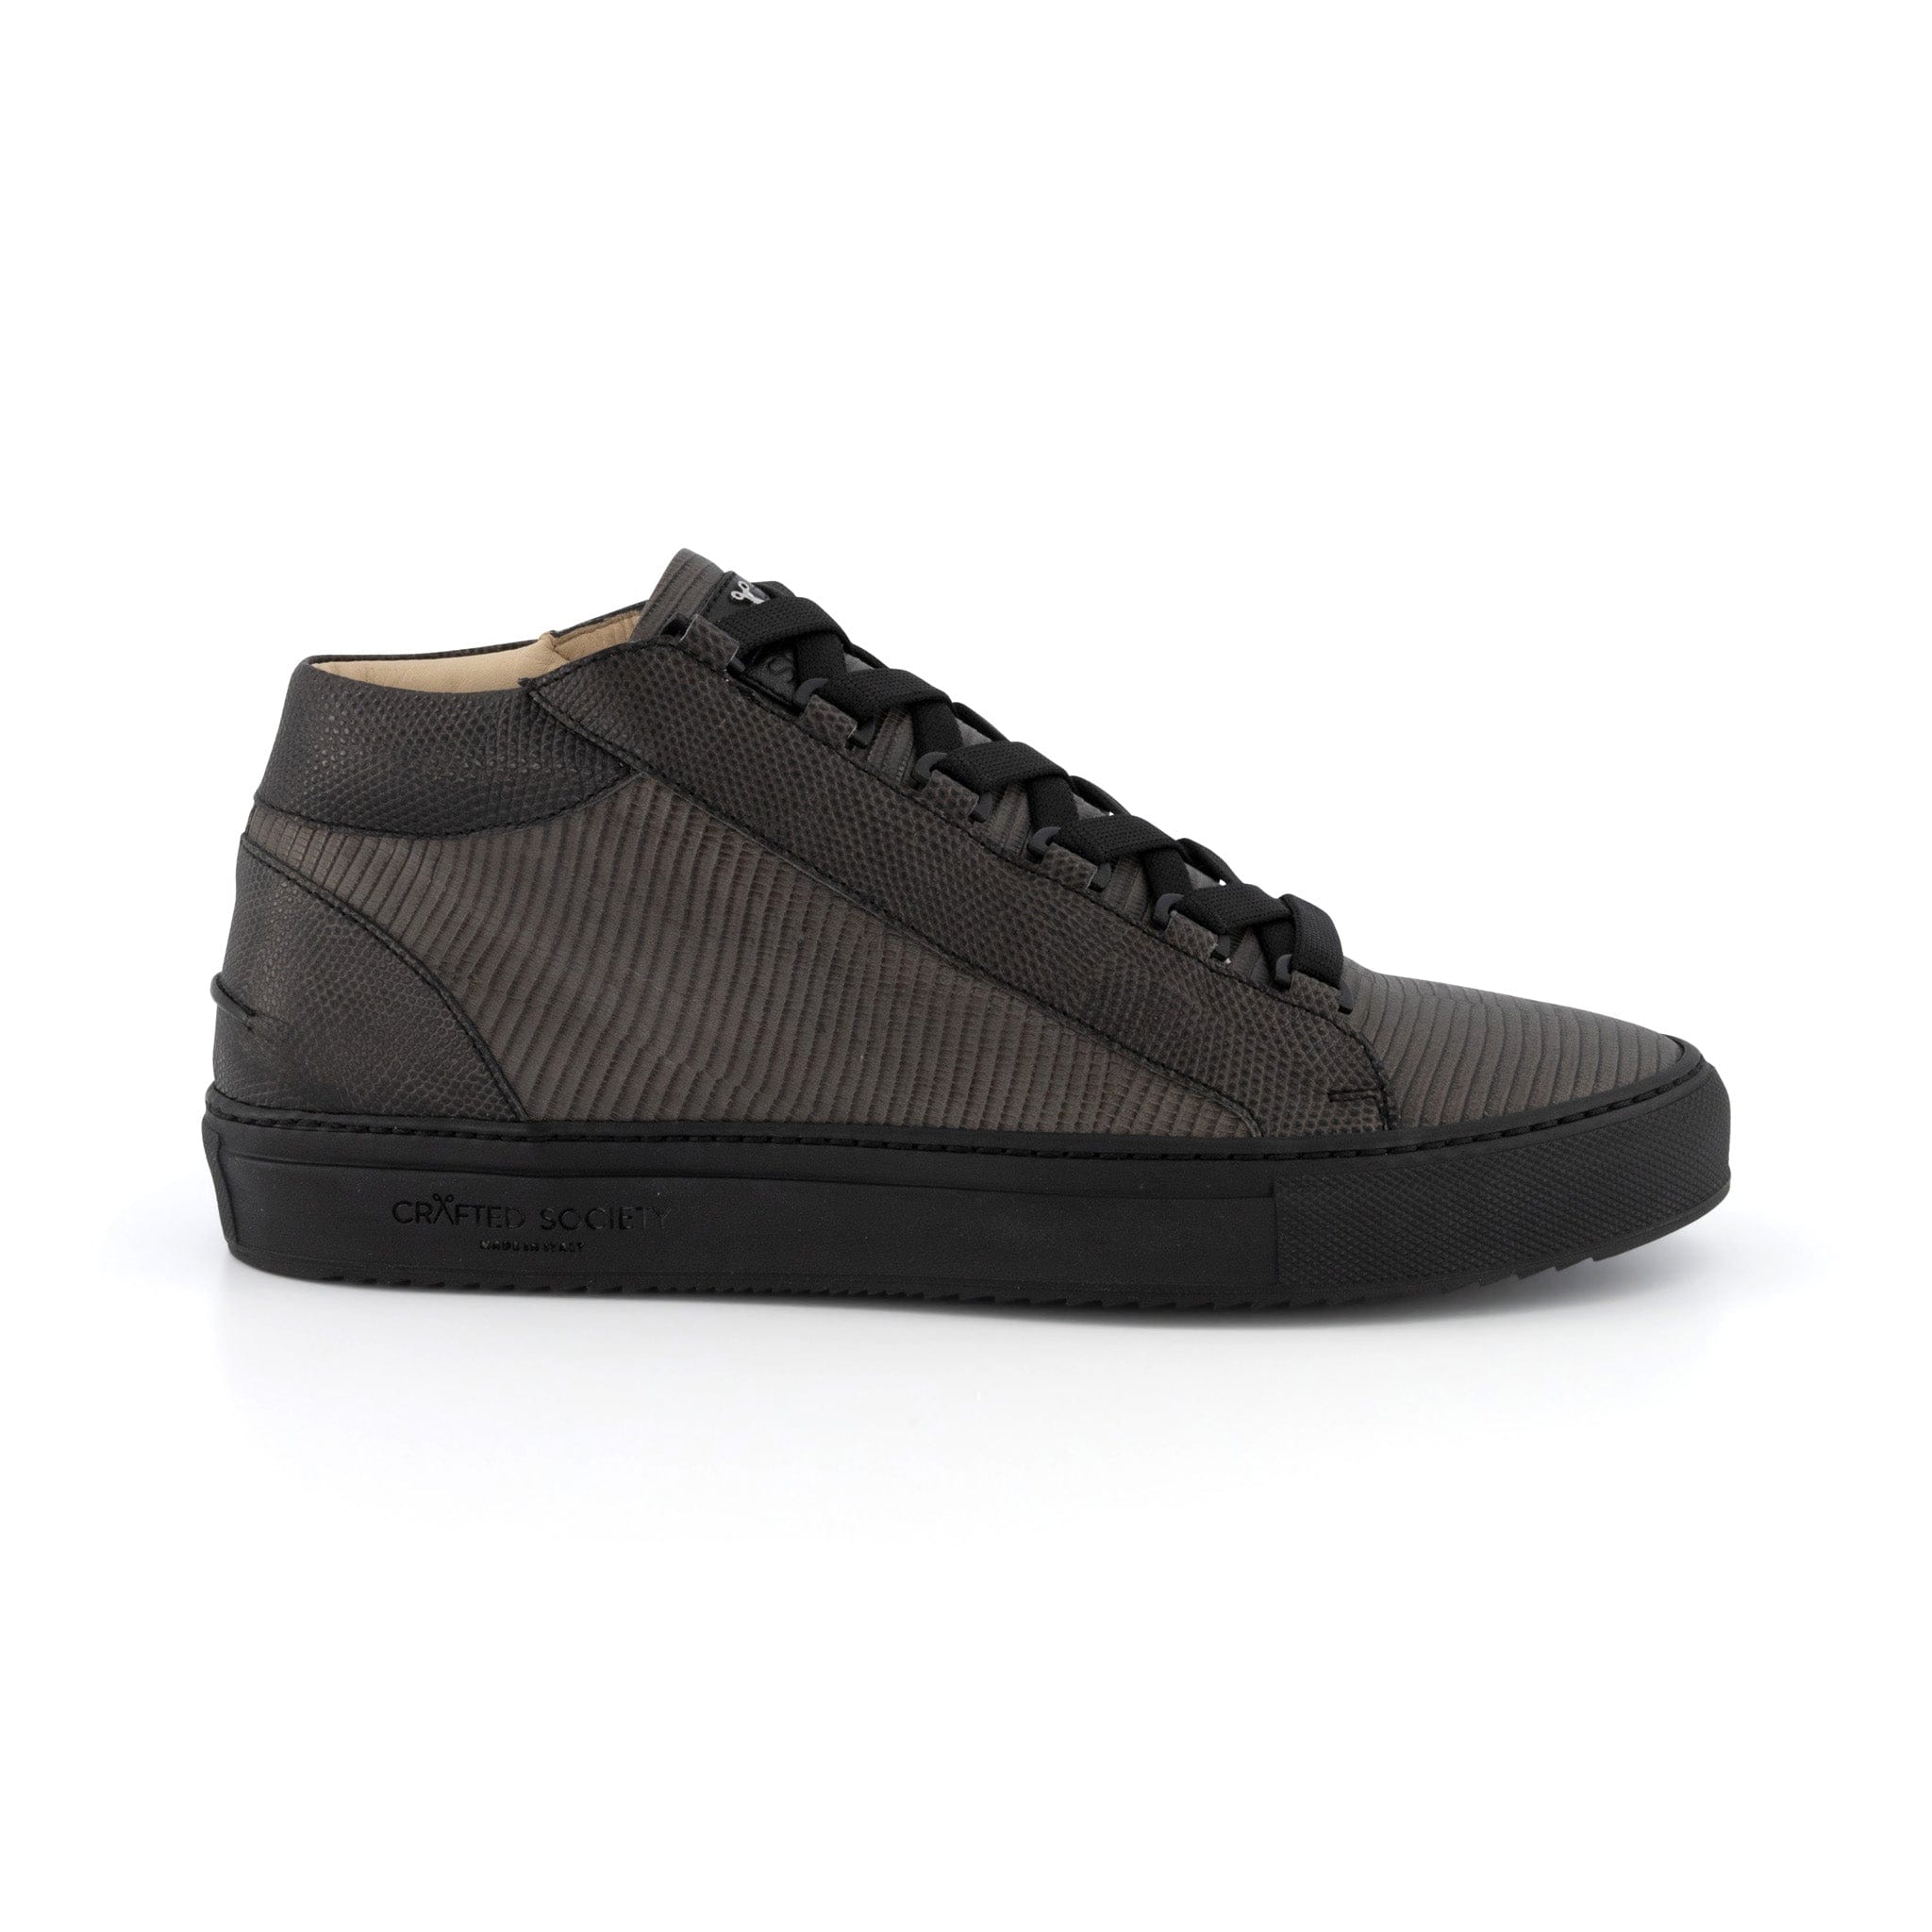 Rico Mid LTD EDN | Grey & Black full grain leather | Black Outsole | Made in Italy | Size 40